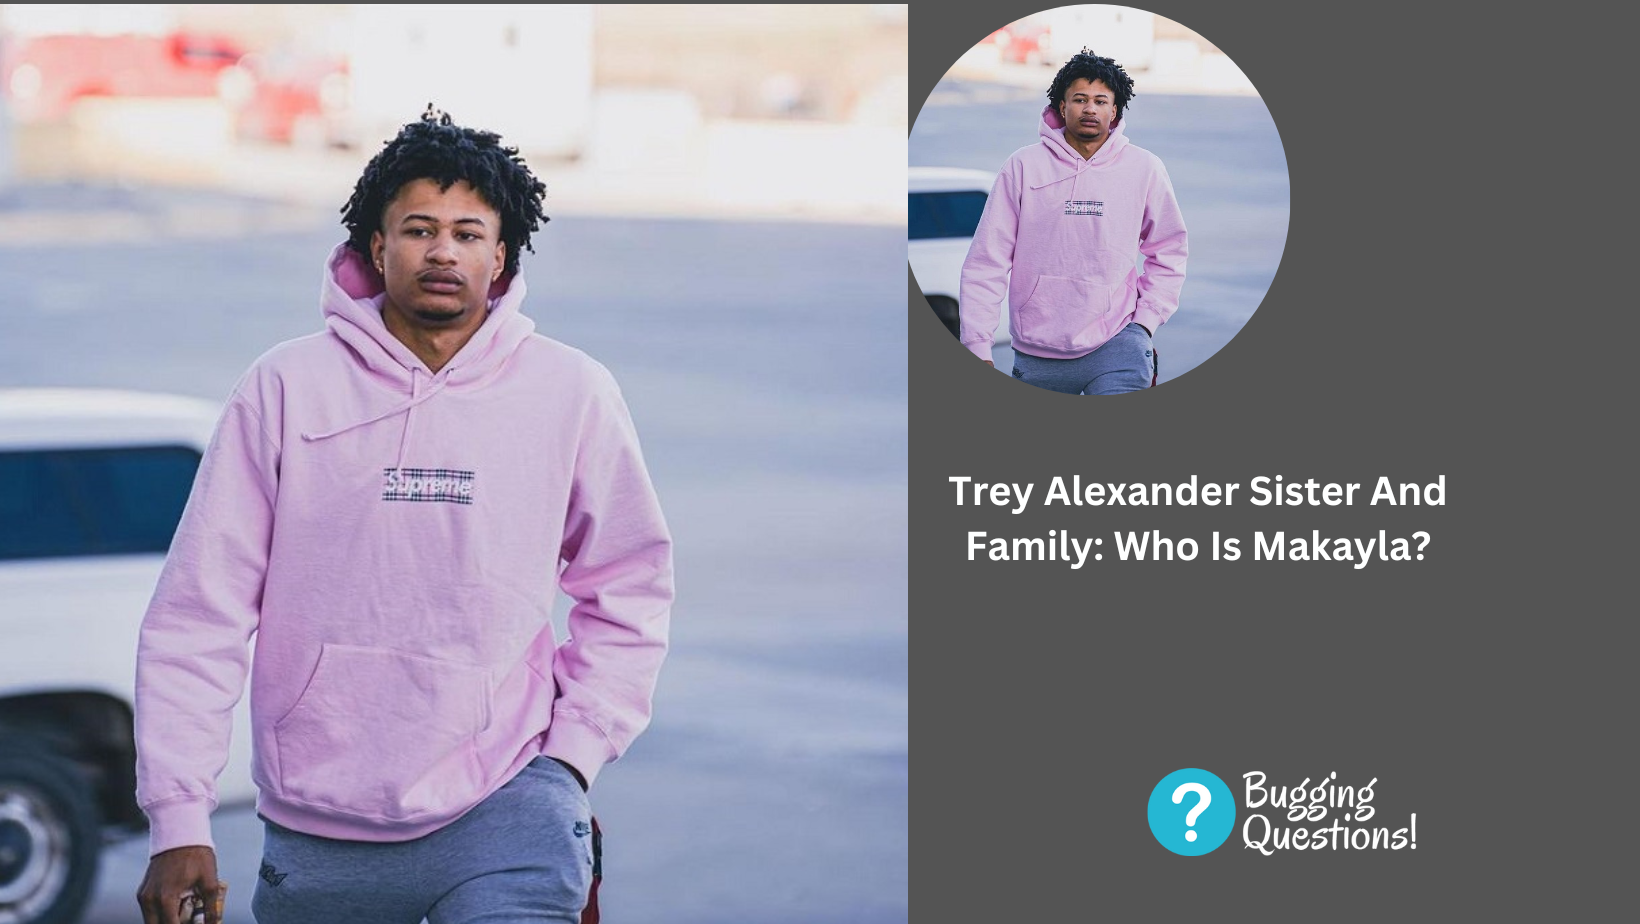 Trey Alexander Sister And Family: Who Is Makayla?